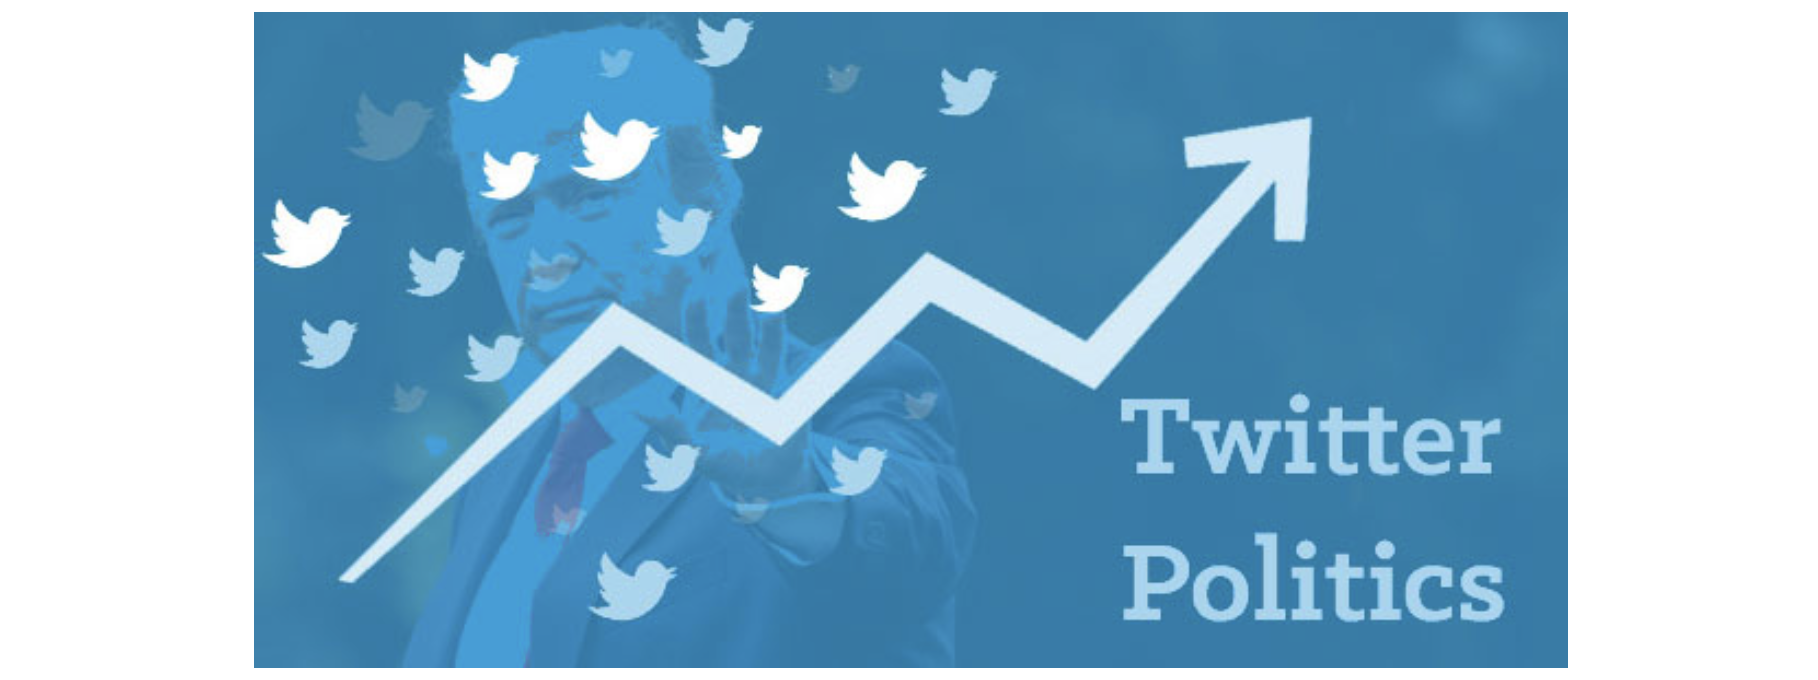 Understanding the political dialogue on Twitter - India & US